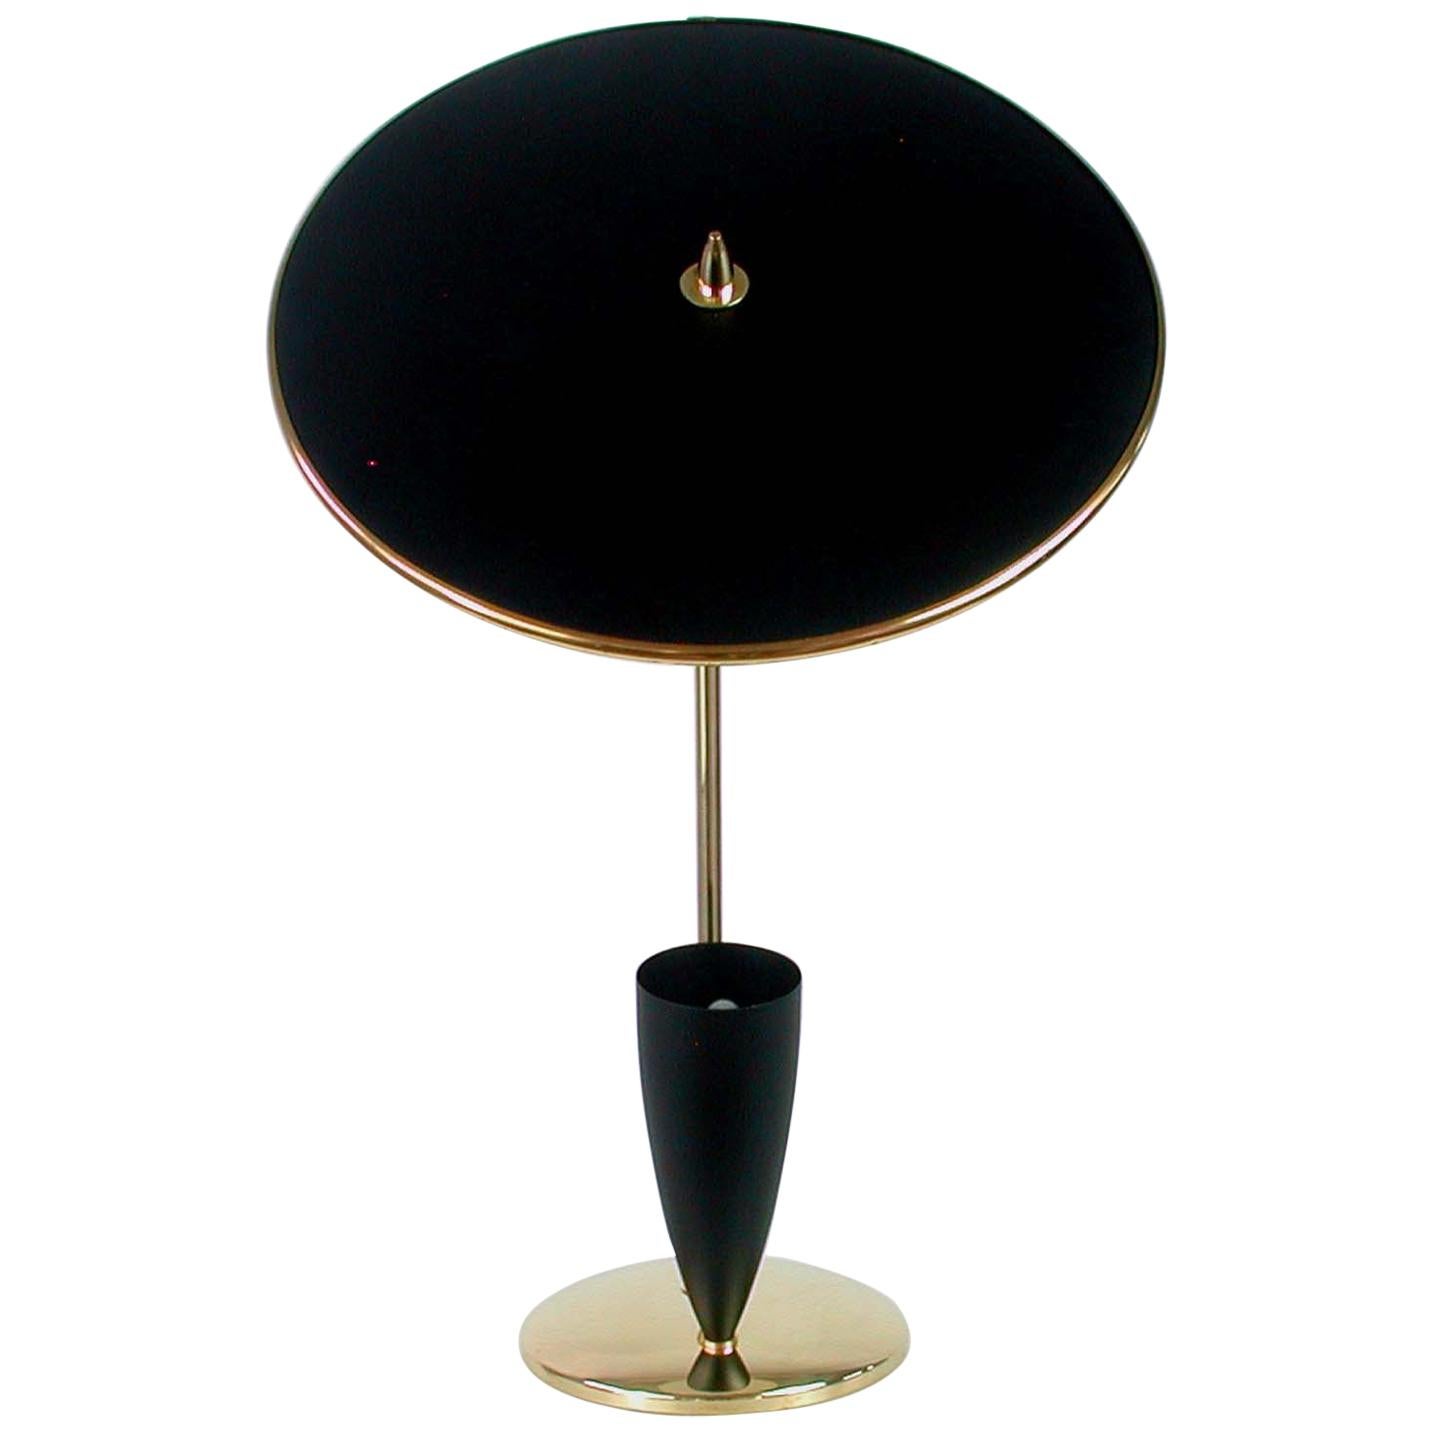 French Midcentury Reflecting Black and Brass Table Lamp, 1950s